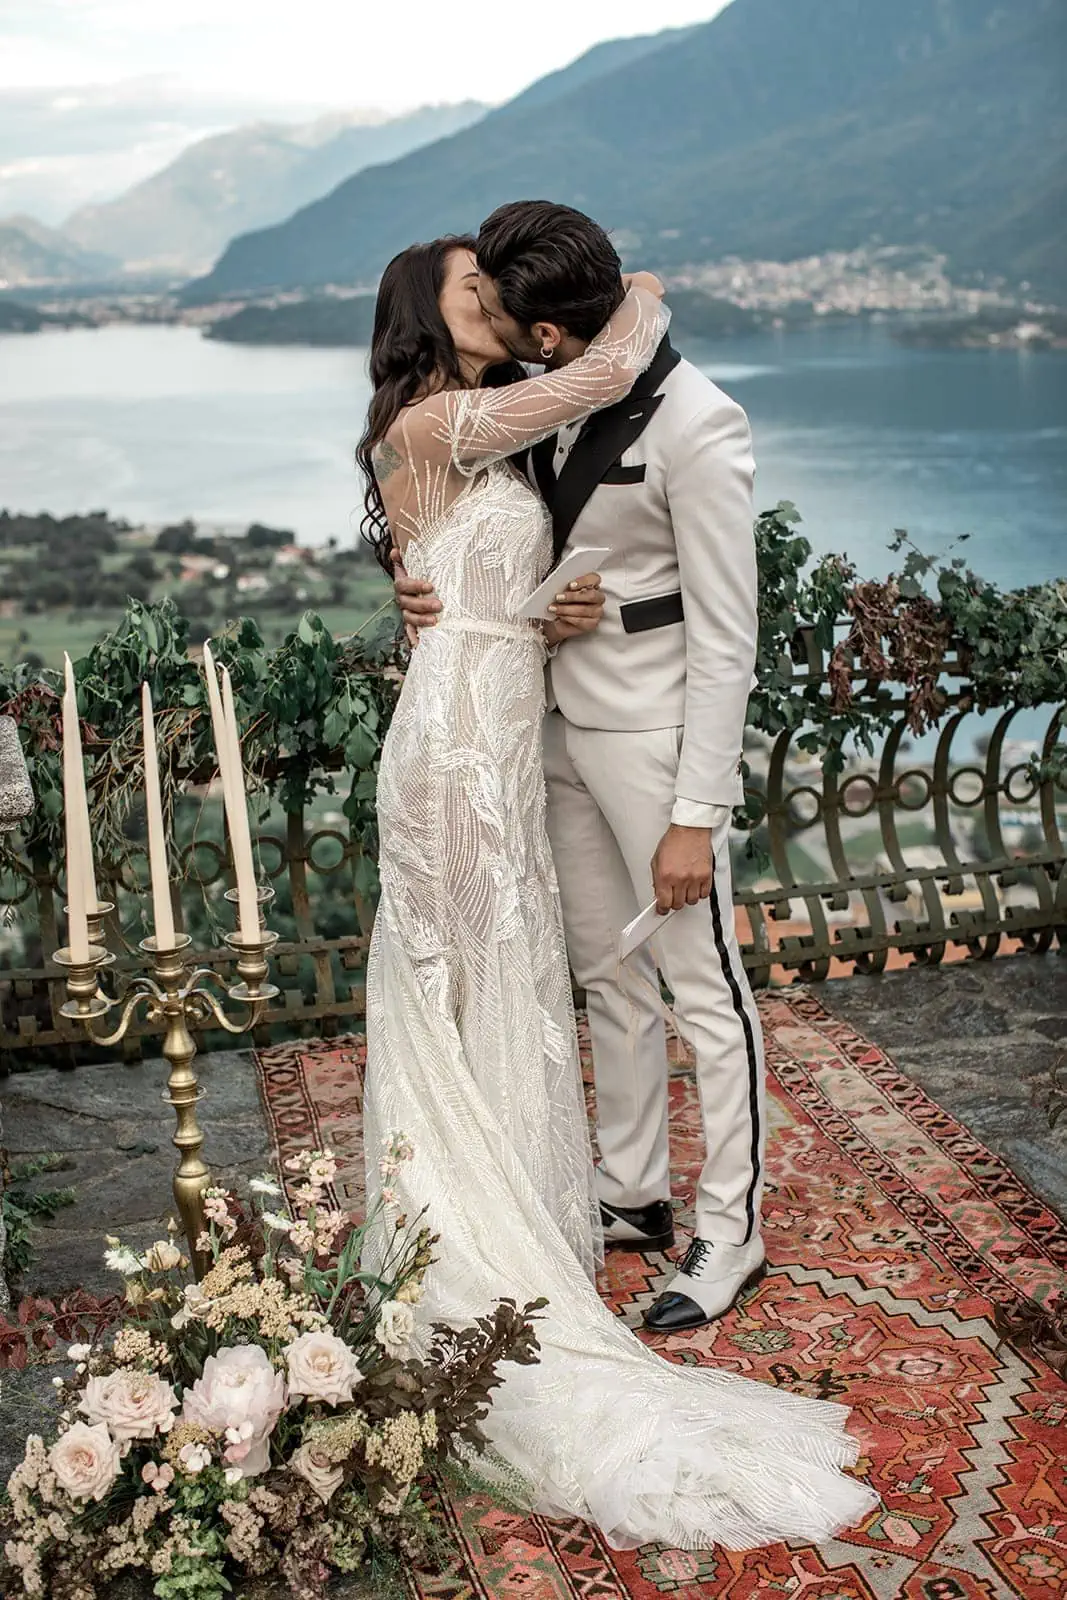 Bride and groom kiss during vow renewal, Italy